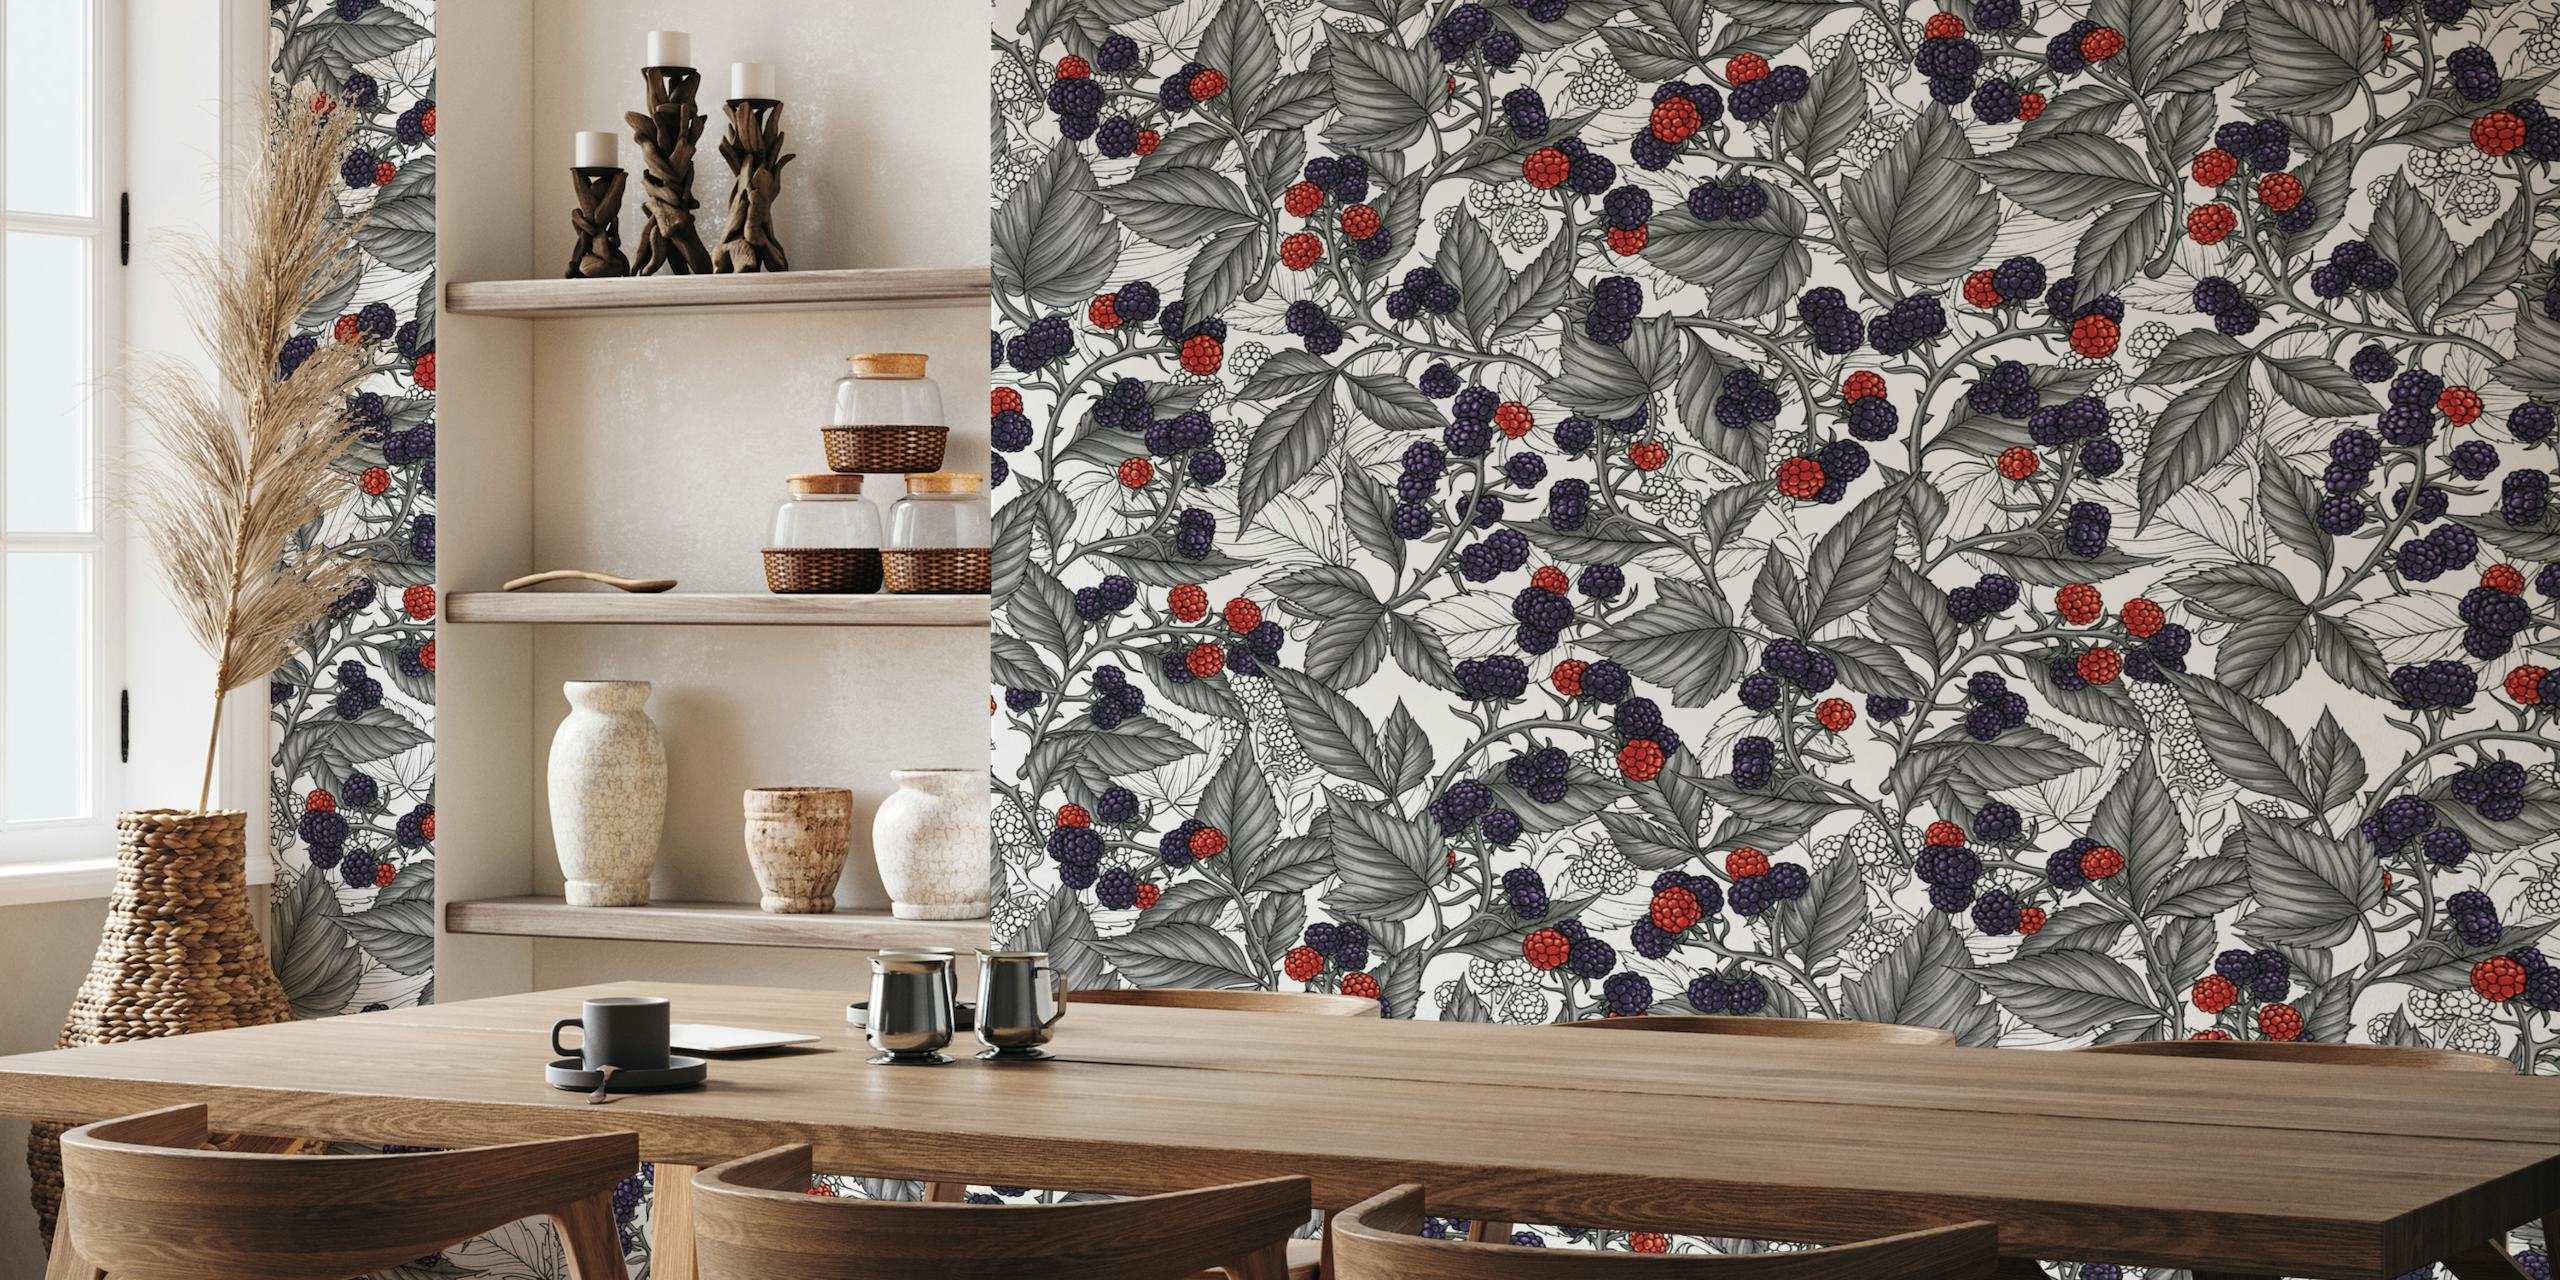 Blackberry branches wall mural with ripe fruit on a white background